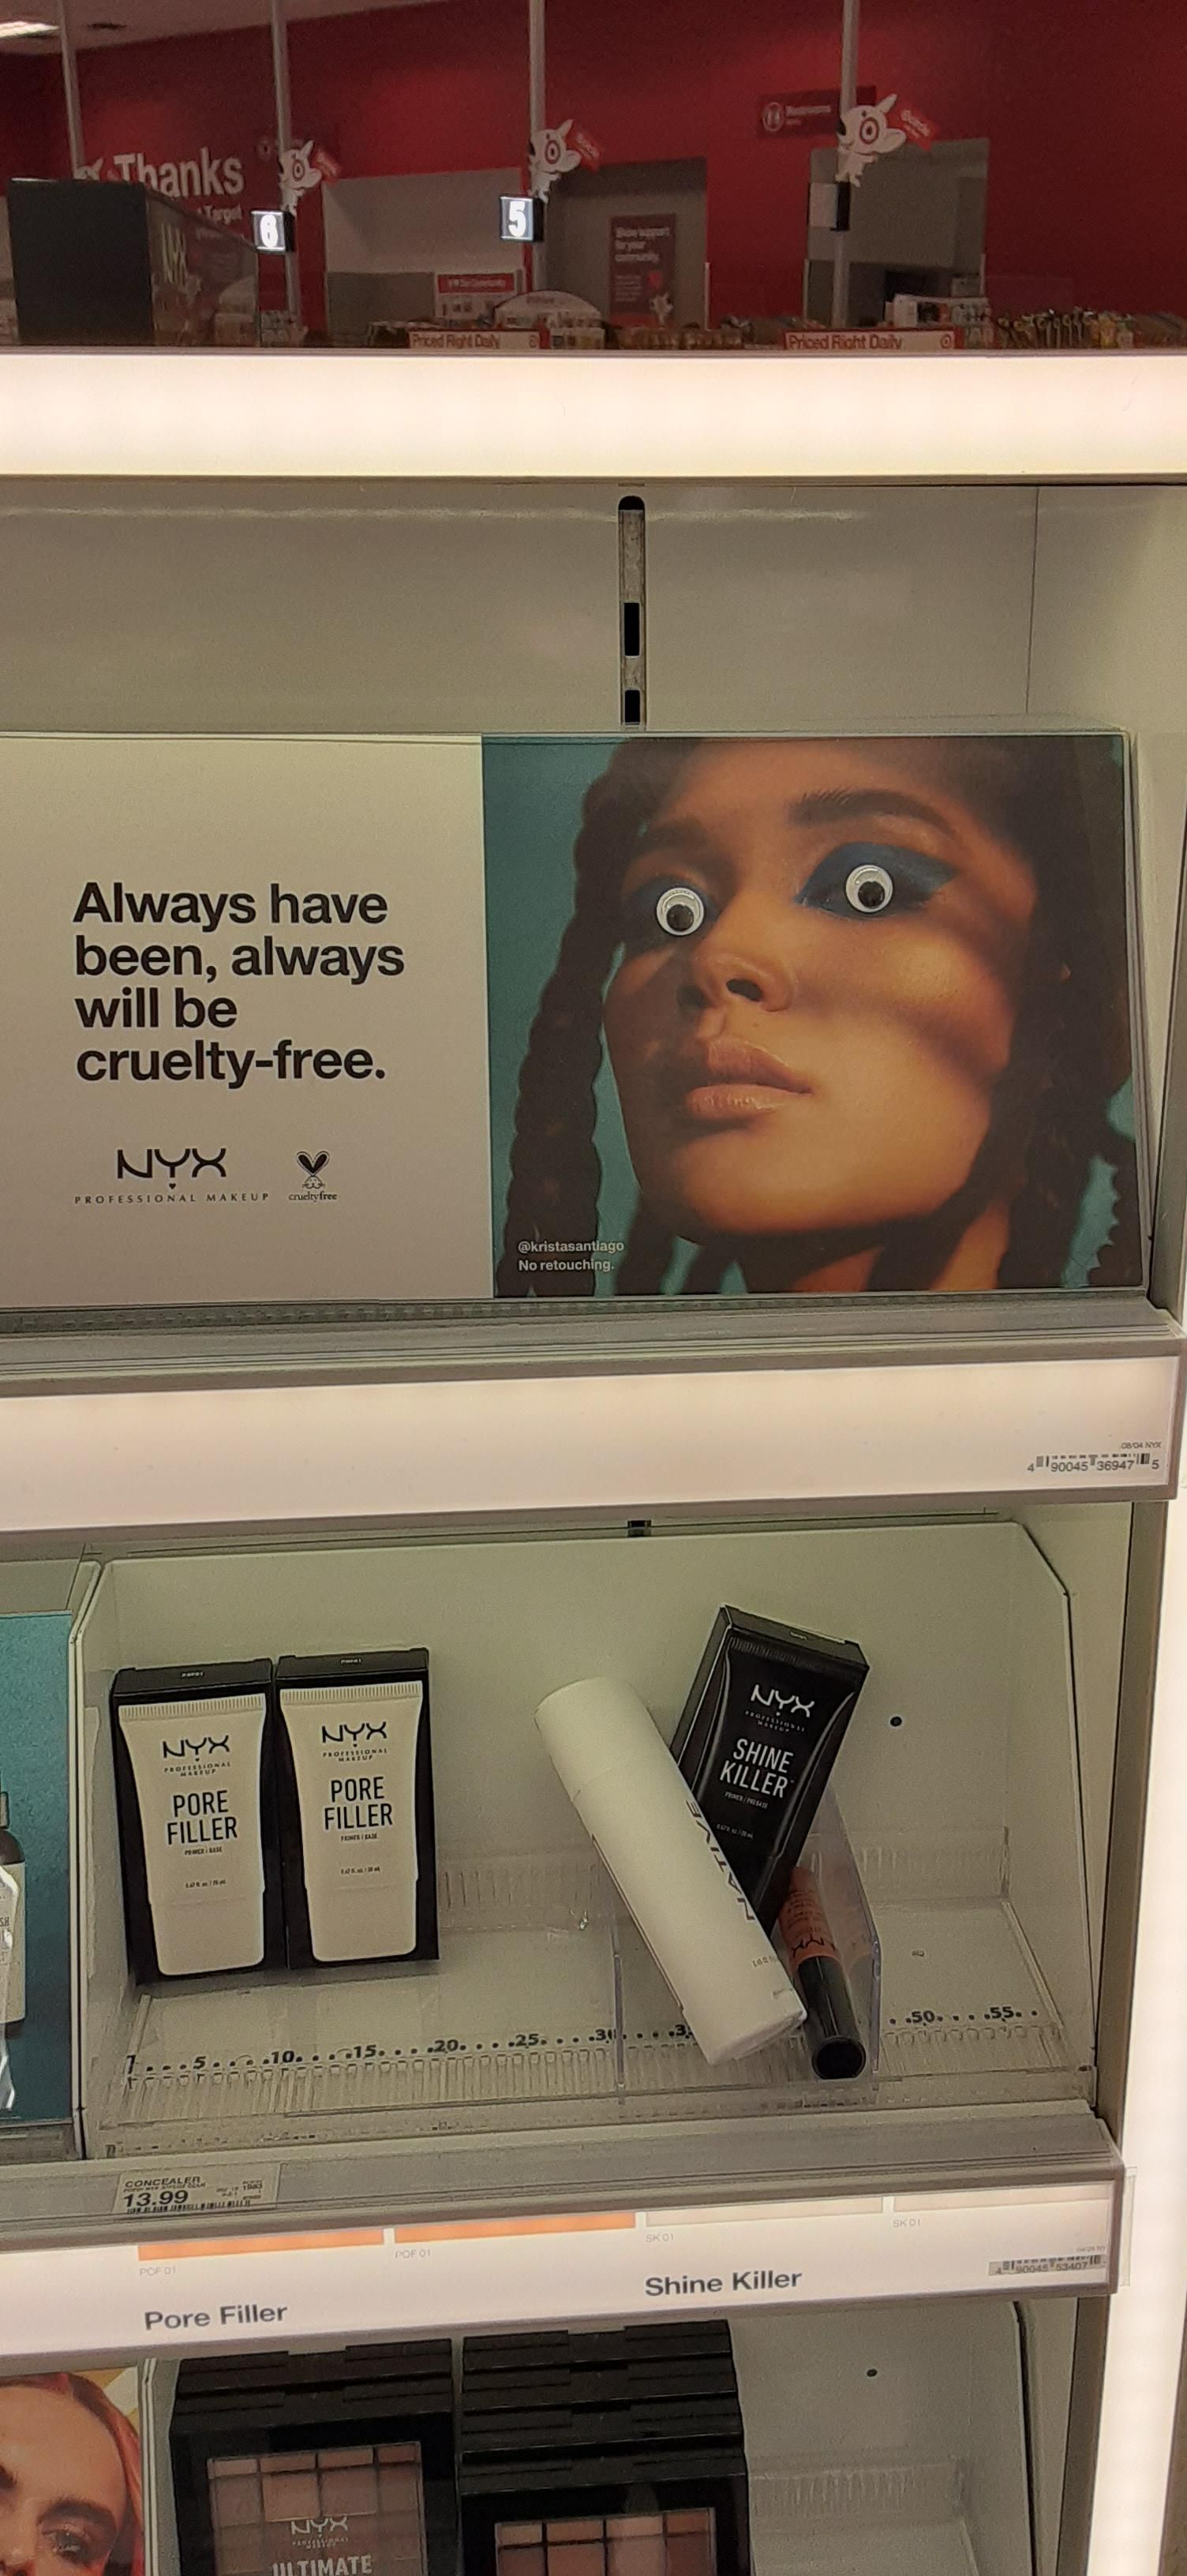 Found this in the make-up section of a local Target.